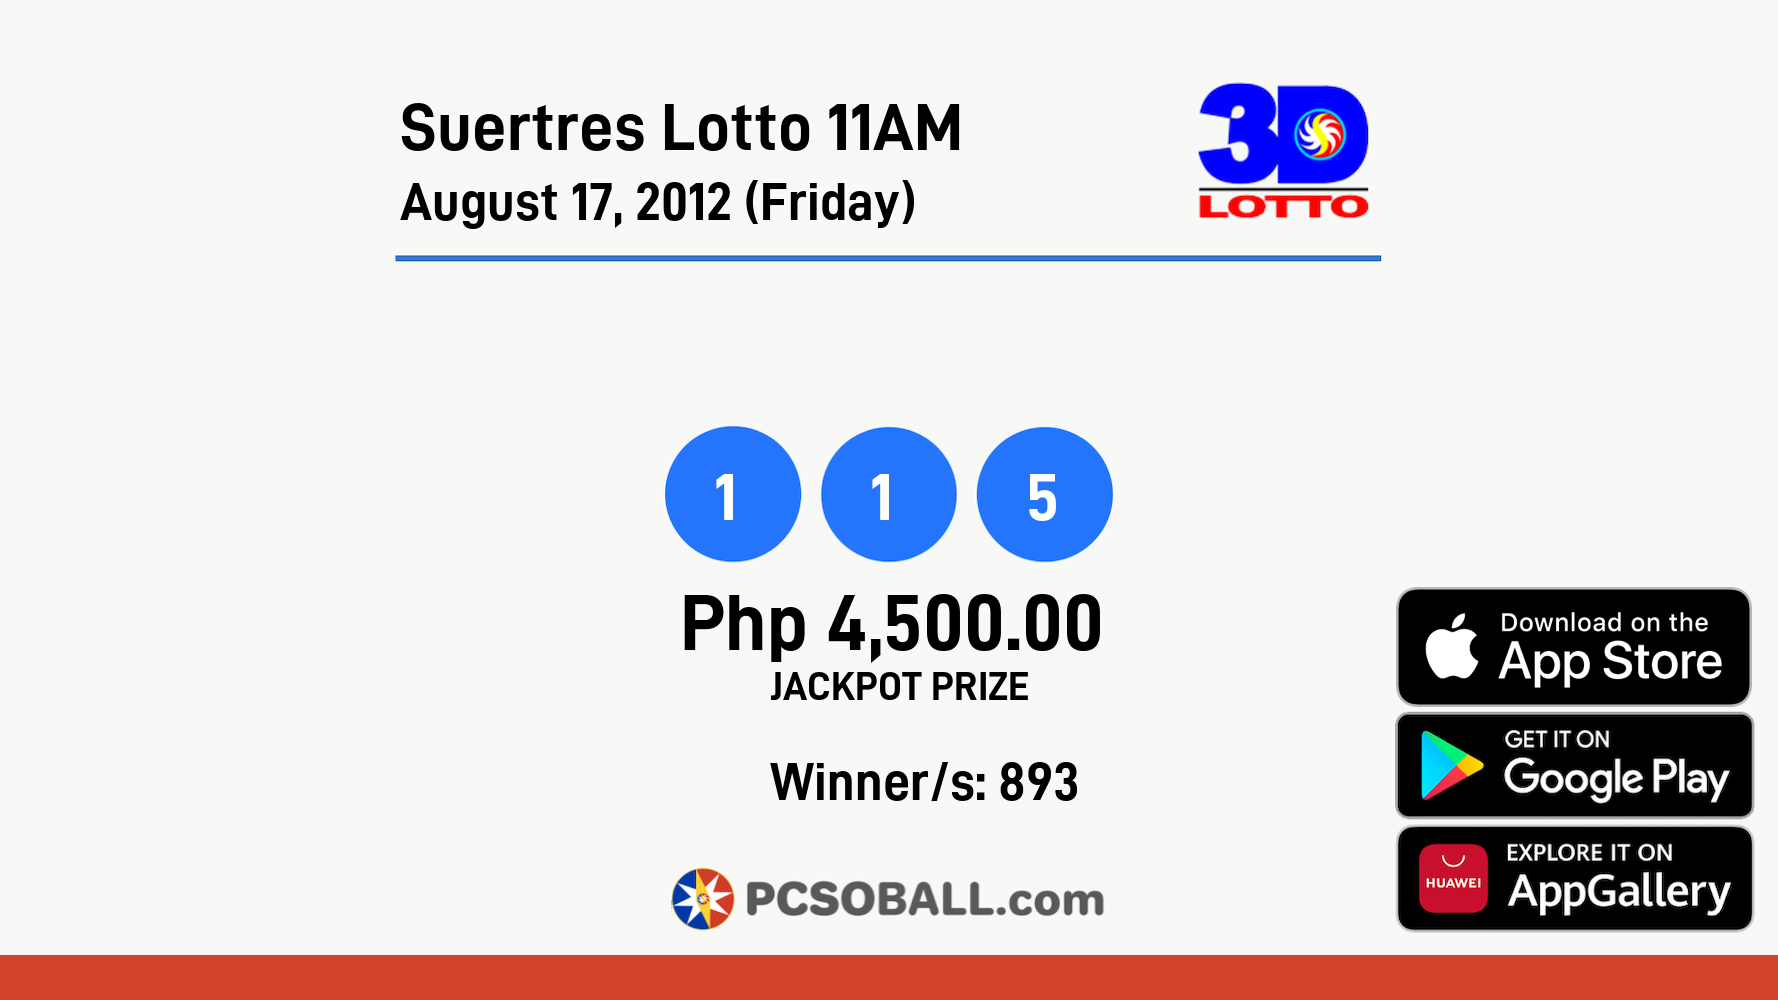 Suertres Lotto 11AM August 17, 2012 (Friday) Result